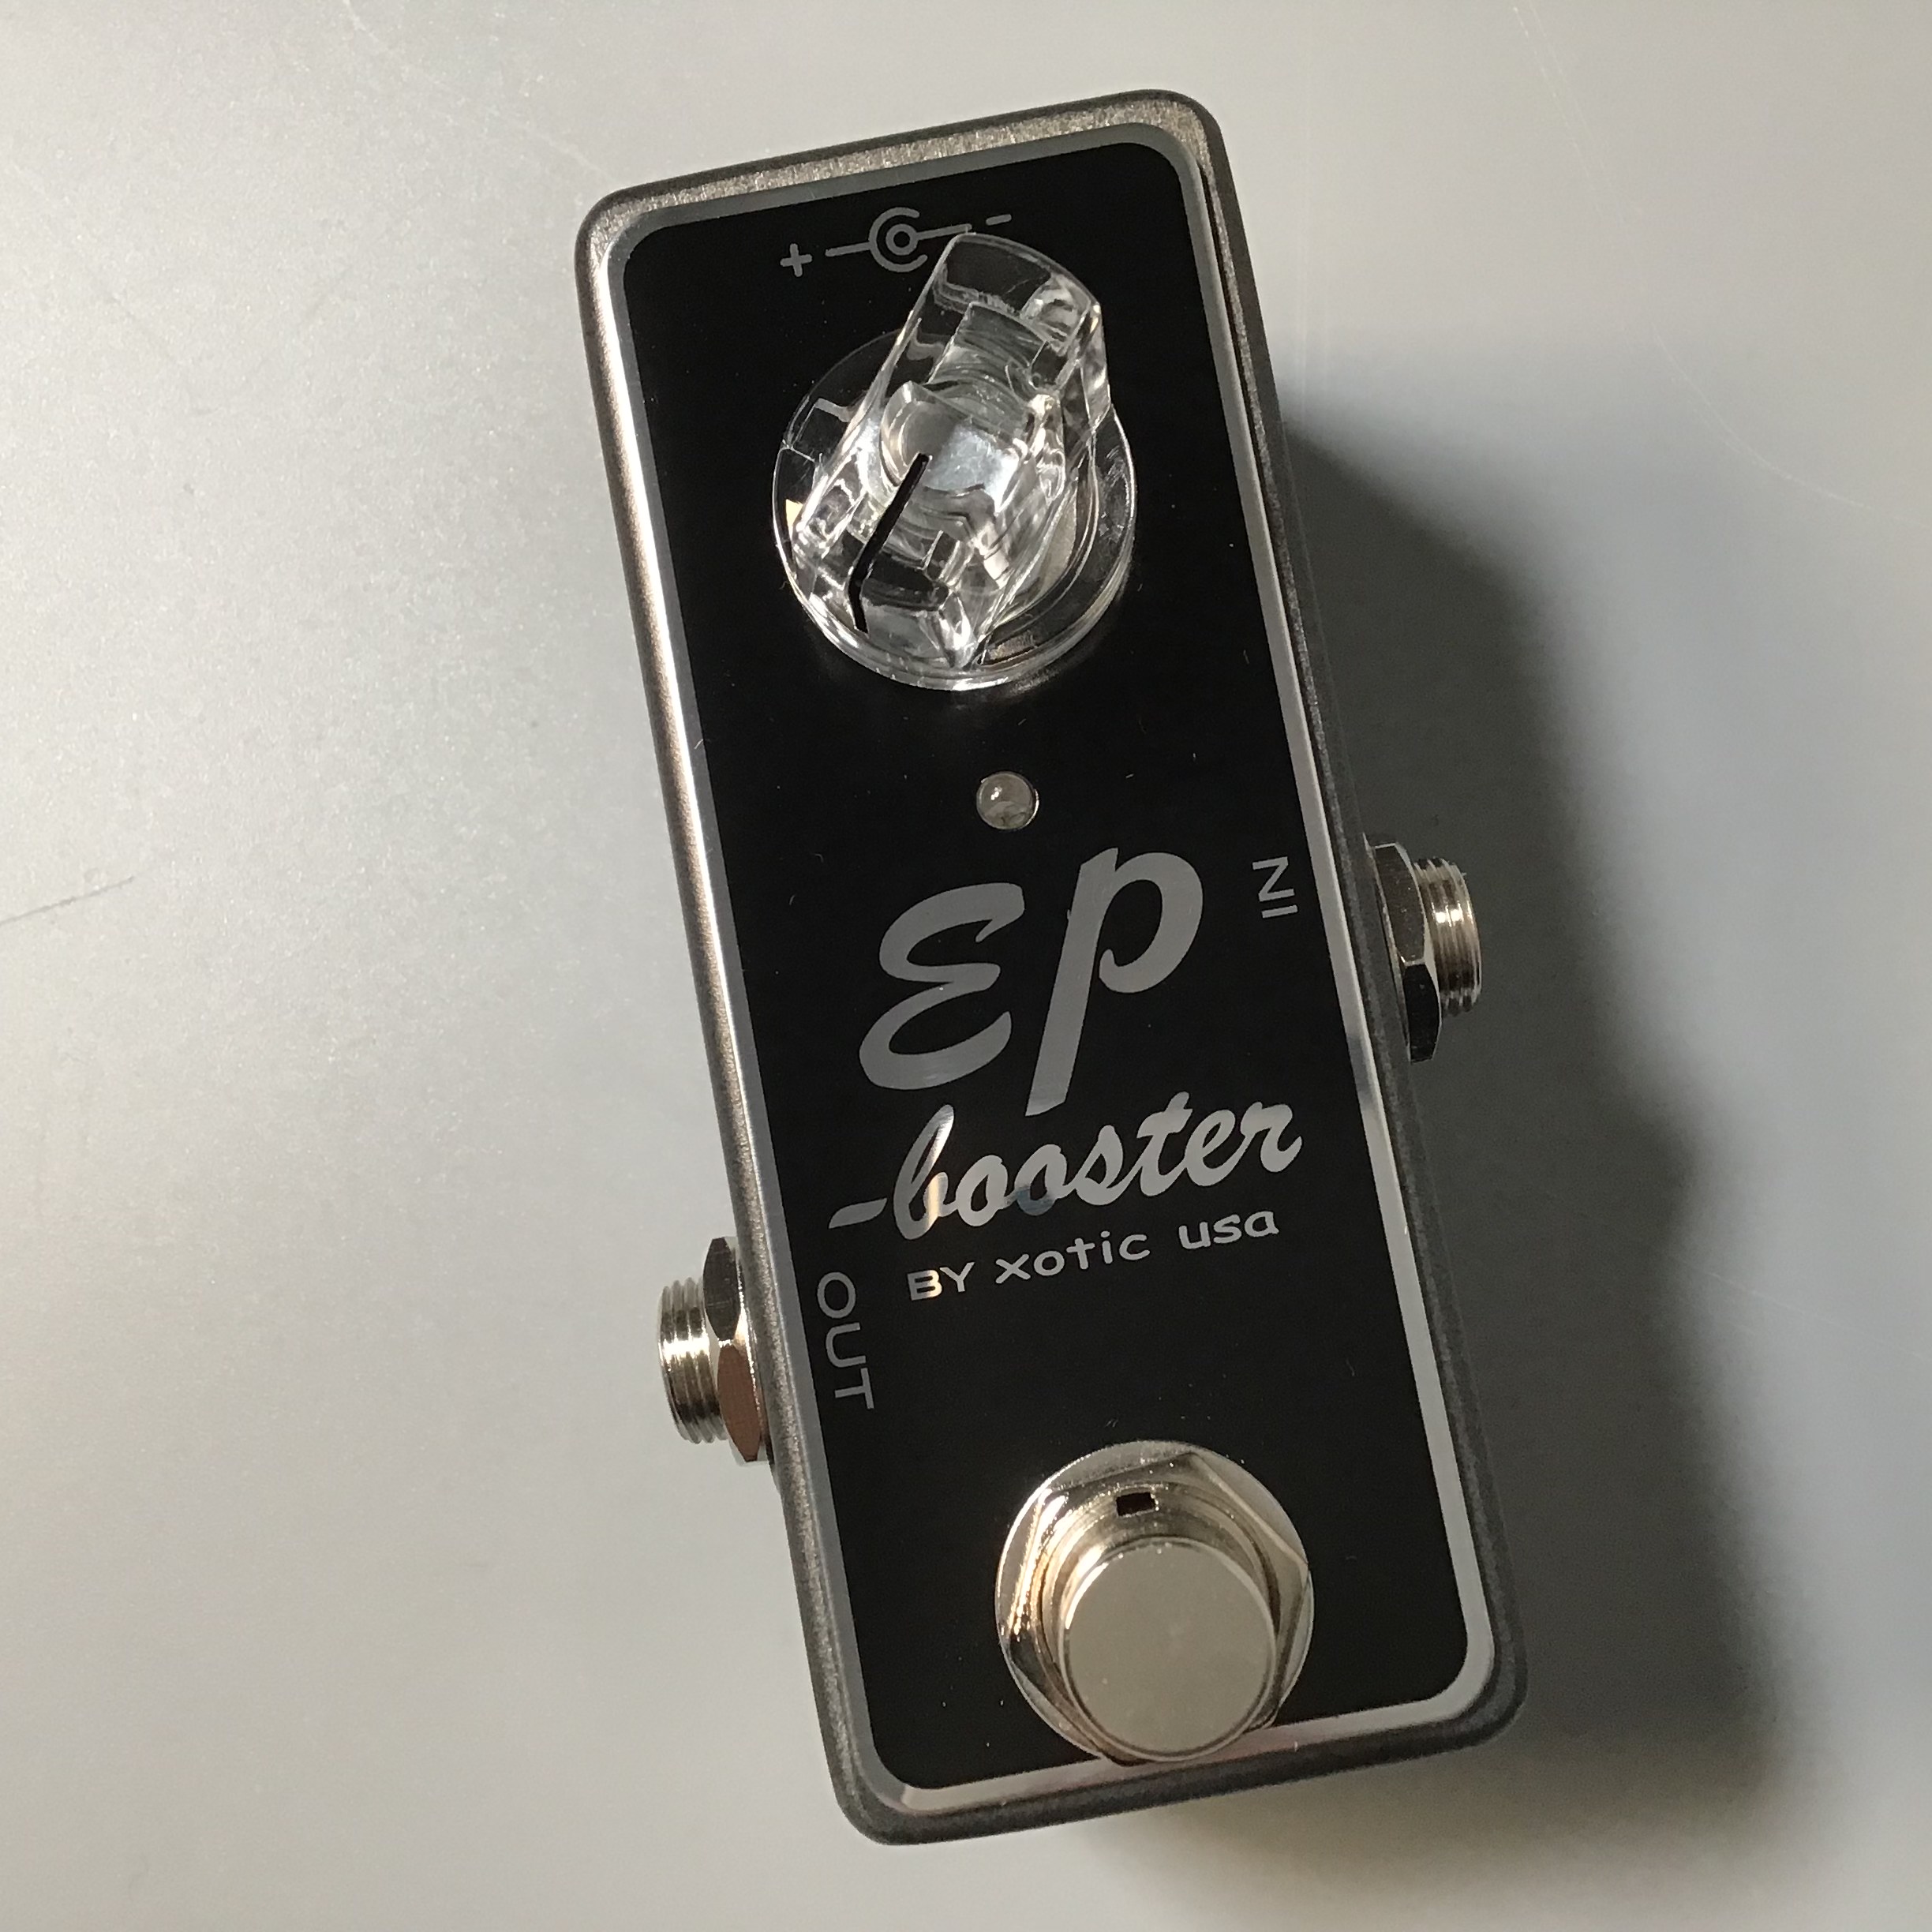 xotic ep booster ギターエフェクター